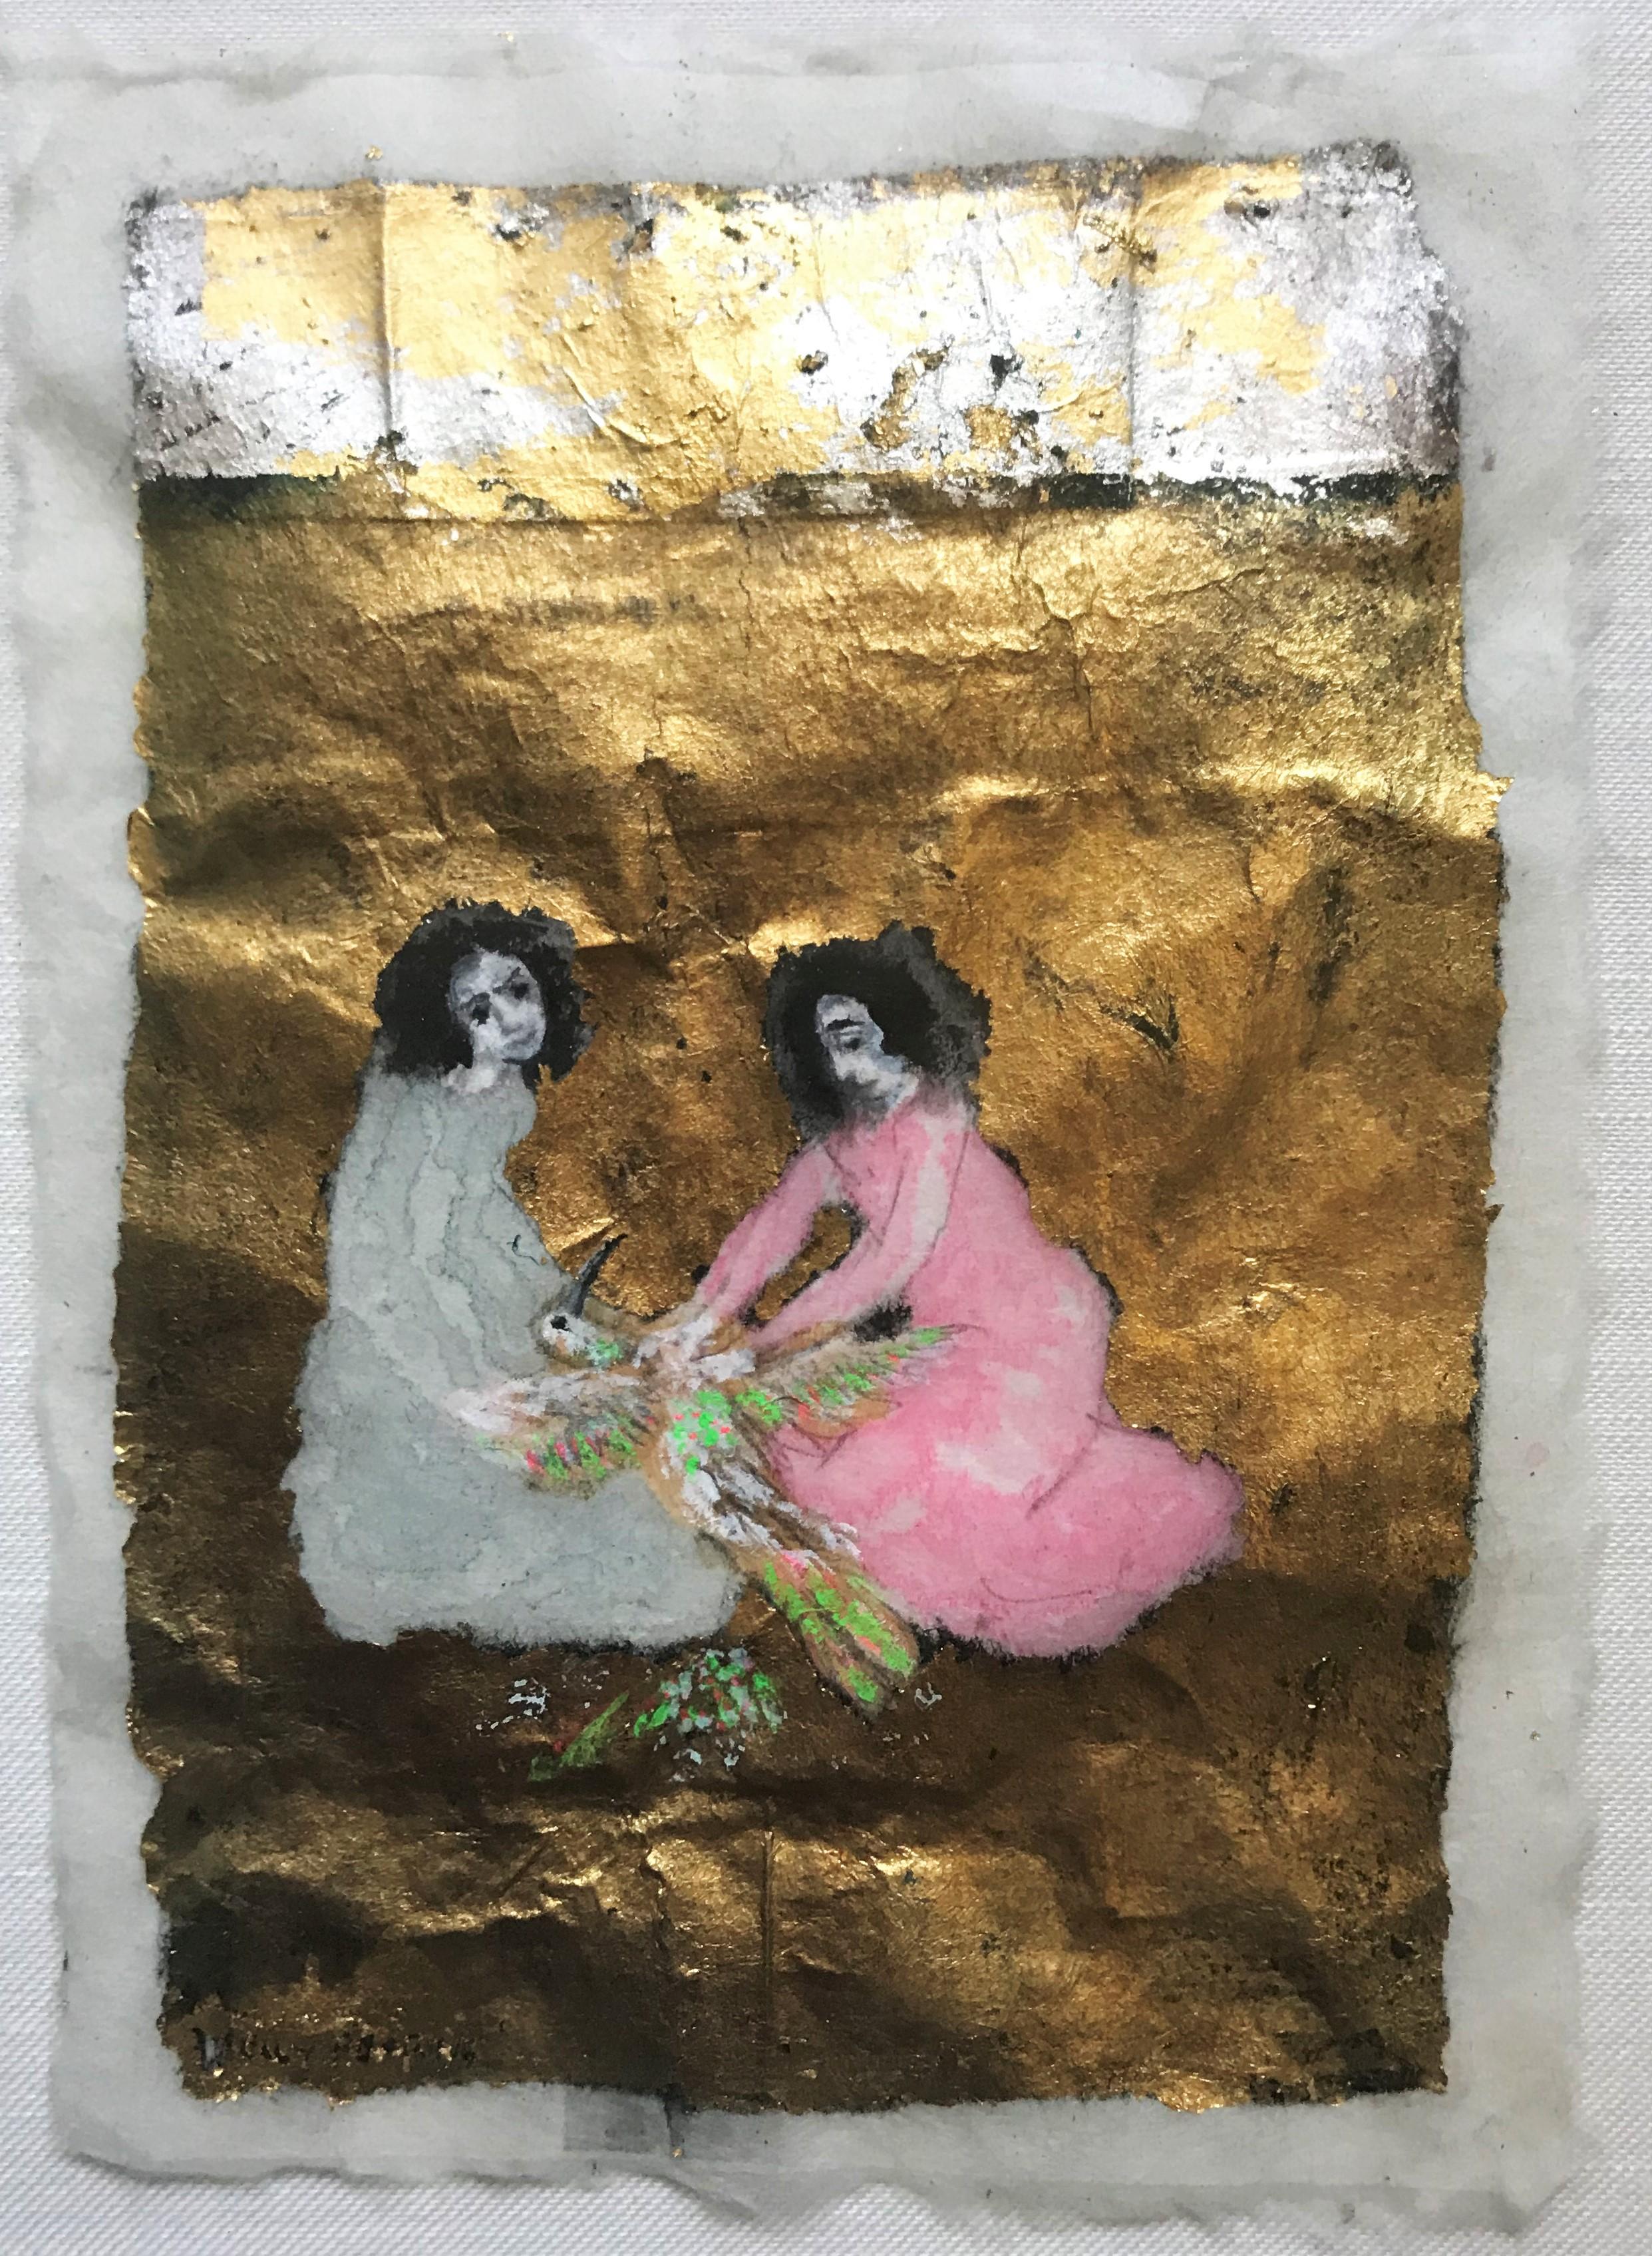  Two Women Plucking a Bird, Watercolor with Gold Leaf, 1971 - Mixed Media Art by Kelly Fearing